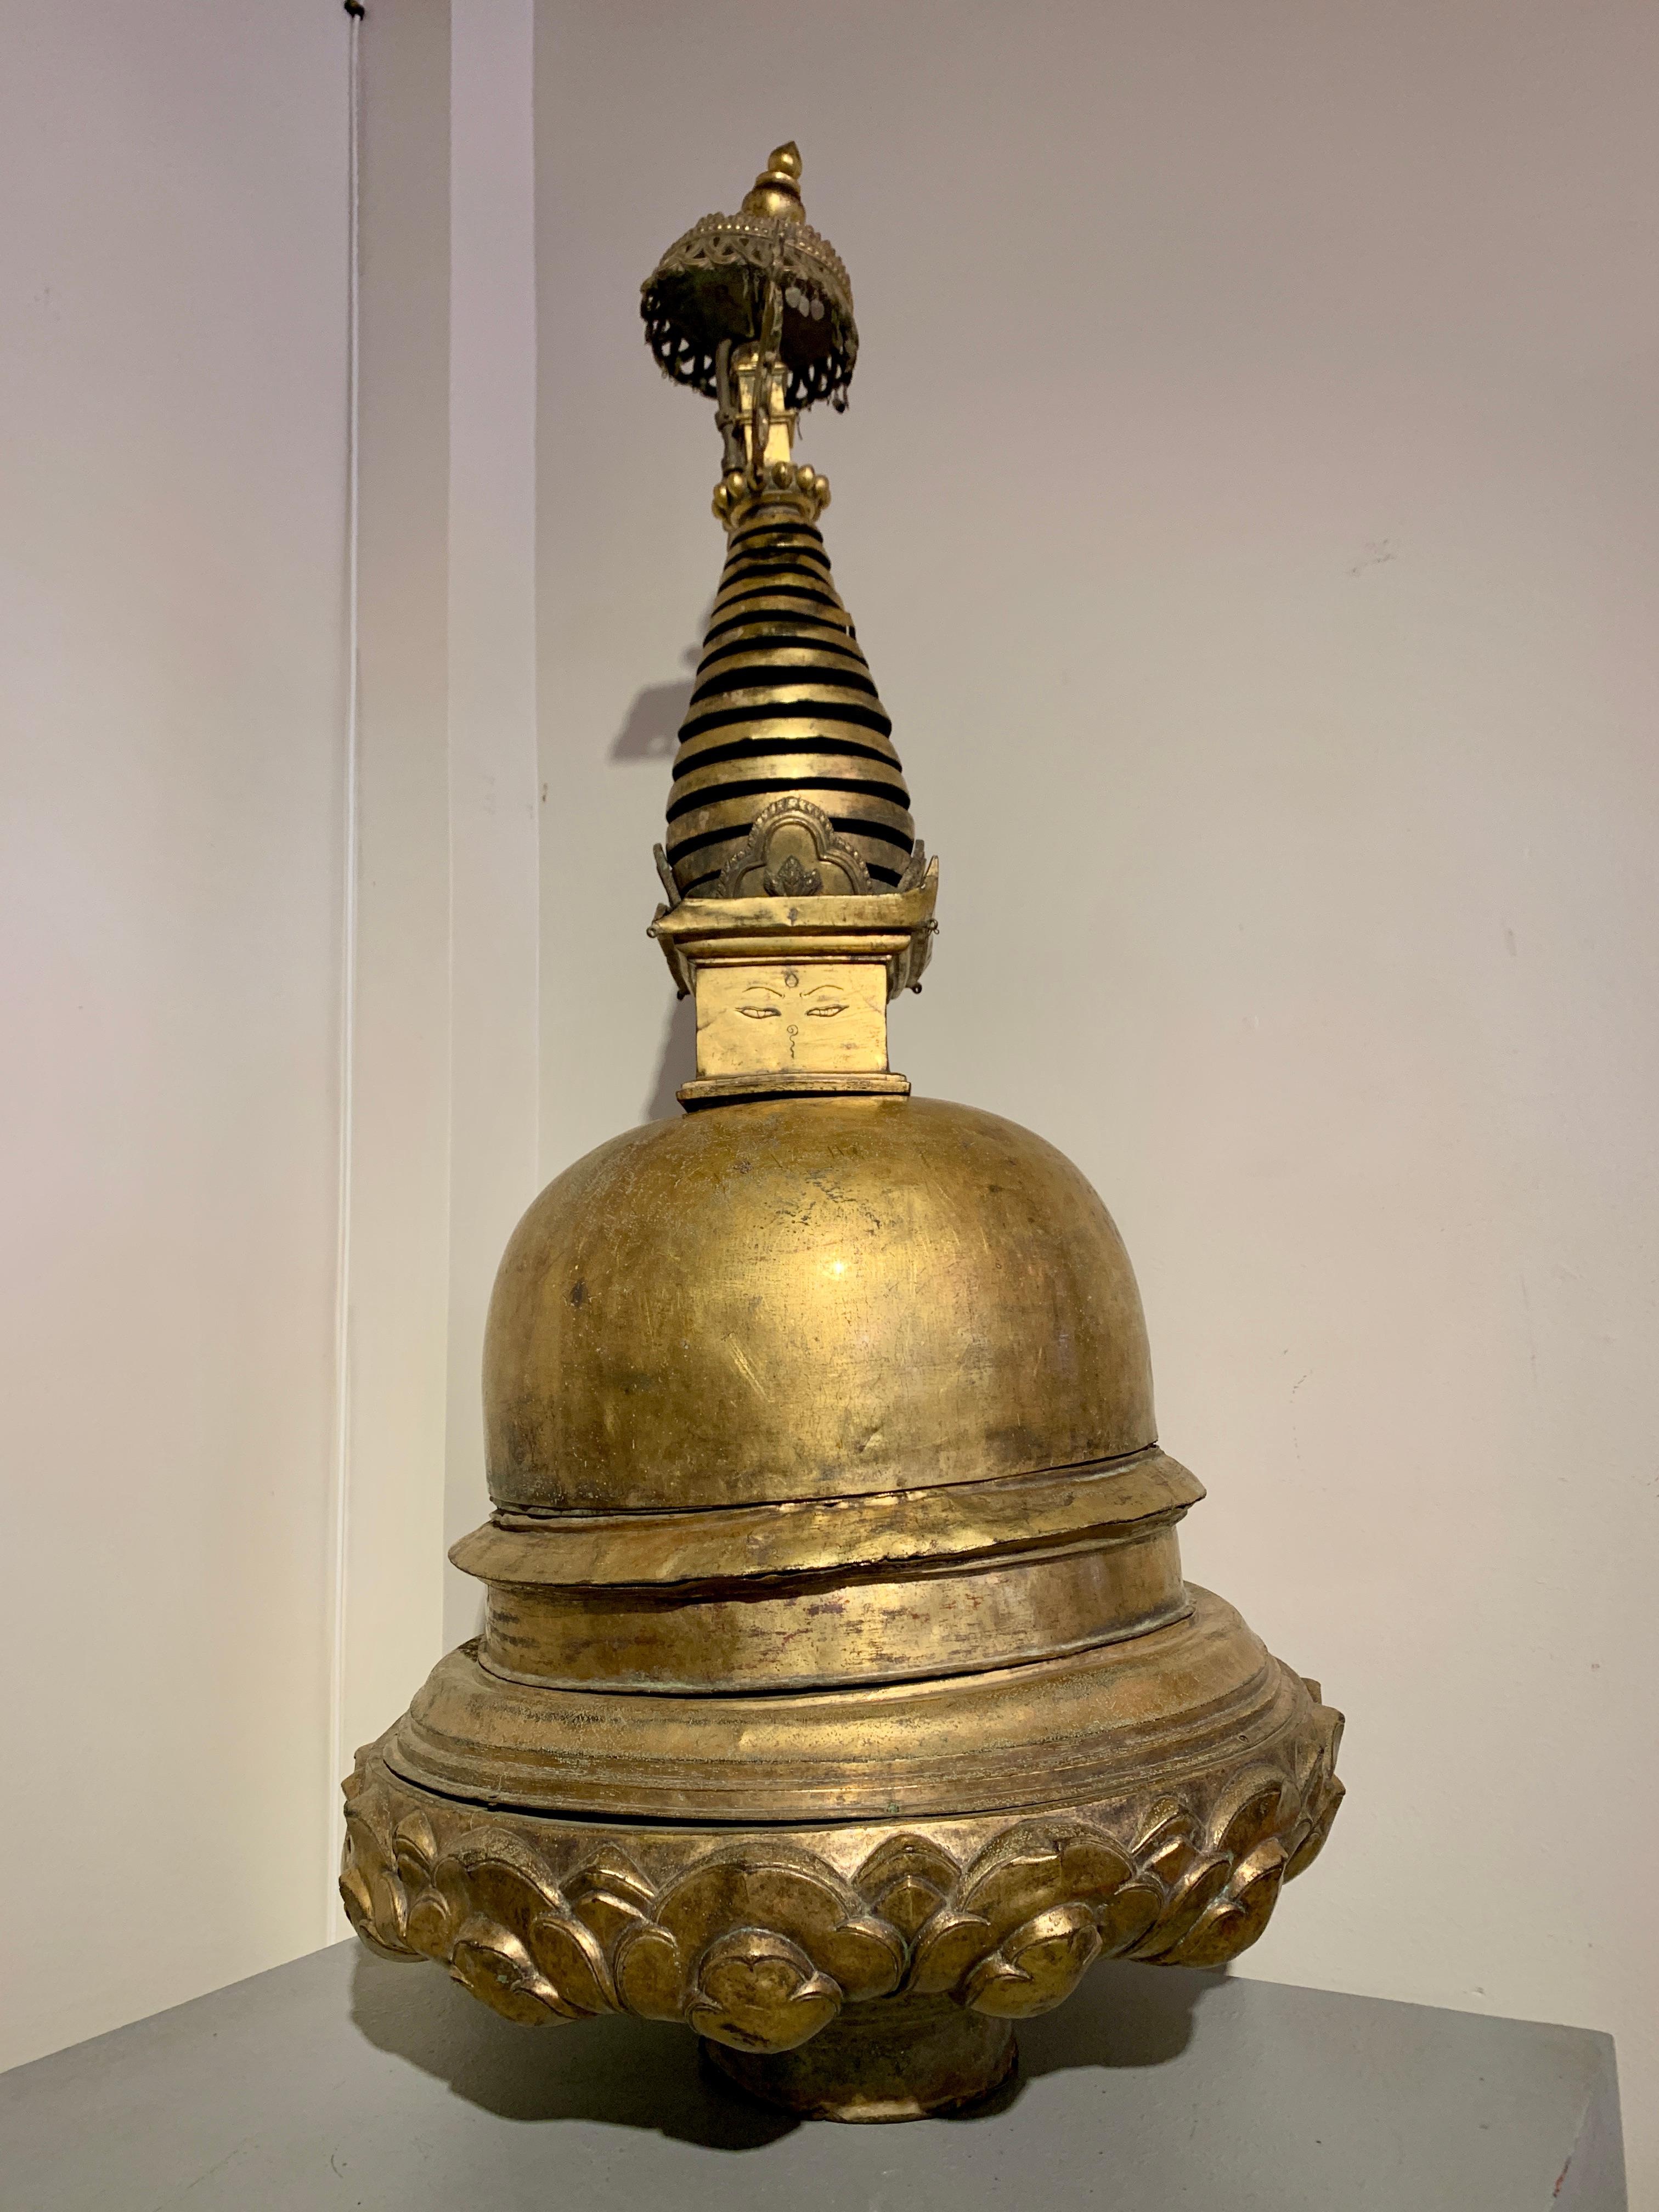 A spectacular large Nepalese stupa, of cast and repousse gilt bronze or copper alloy, 16th/17th century, Nepal.

The magnificent stupa of traditional form, featuring a stylized lotus base supporting a large dome. A square structure, called a